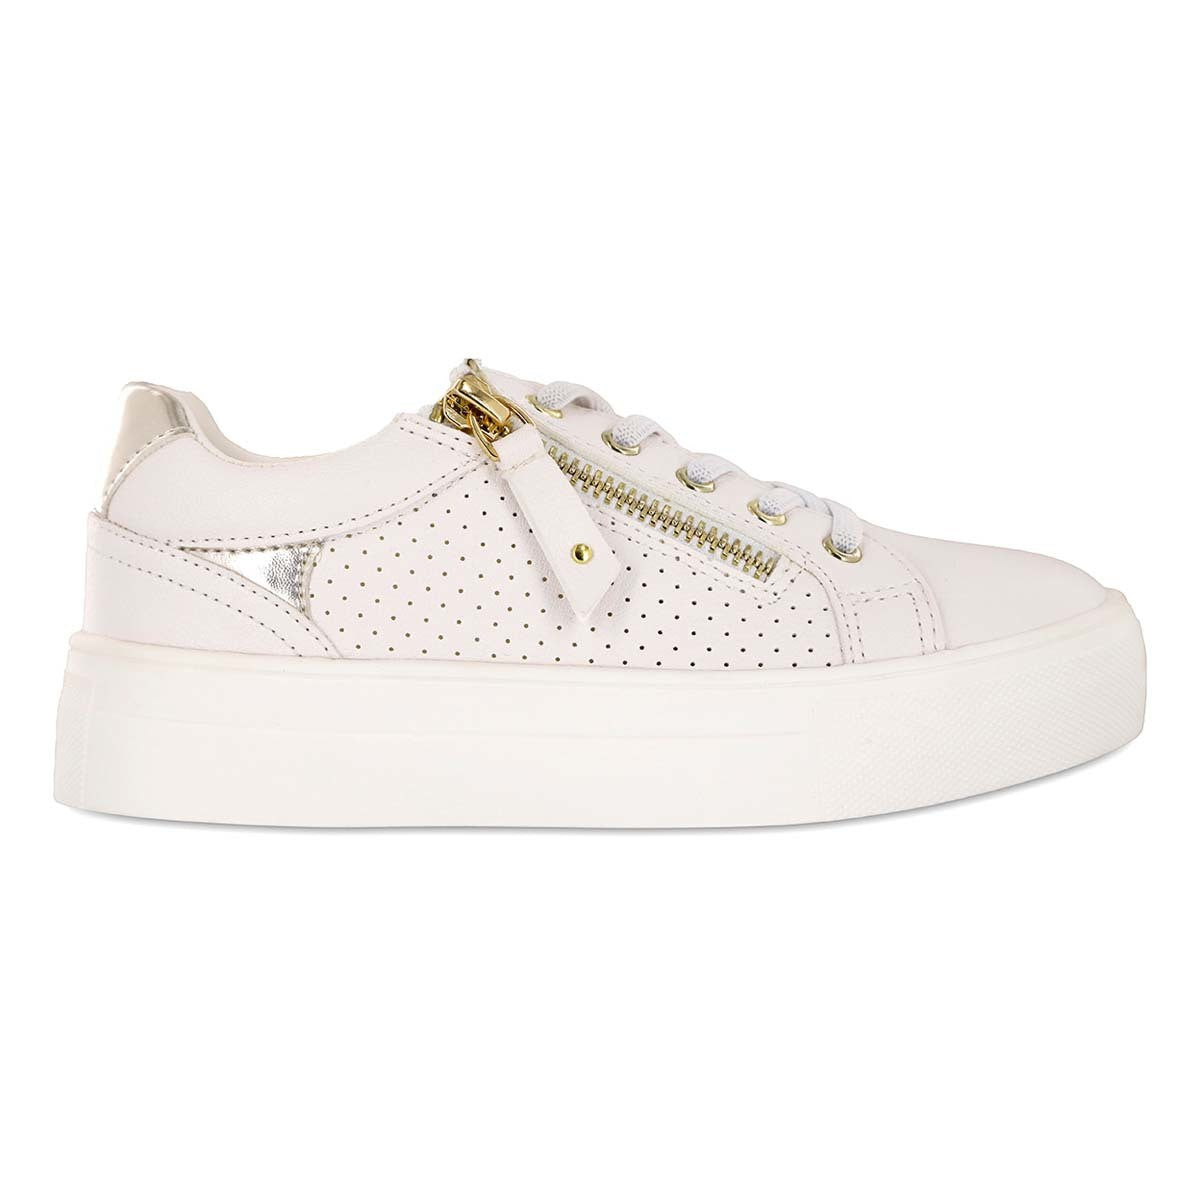 Girls Lil Jilie White Leather Sneakers